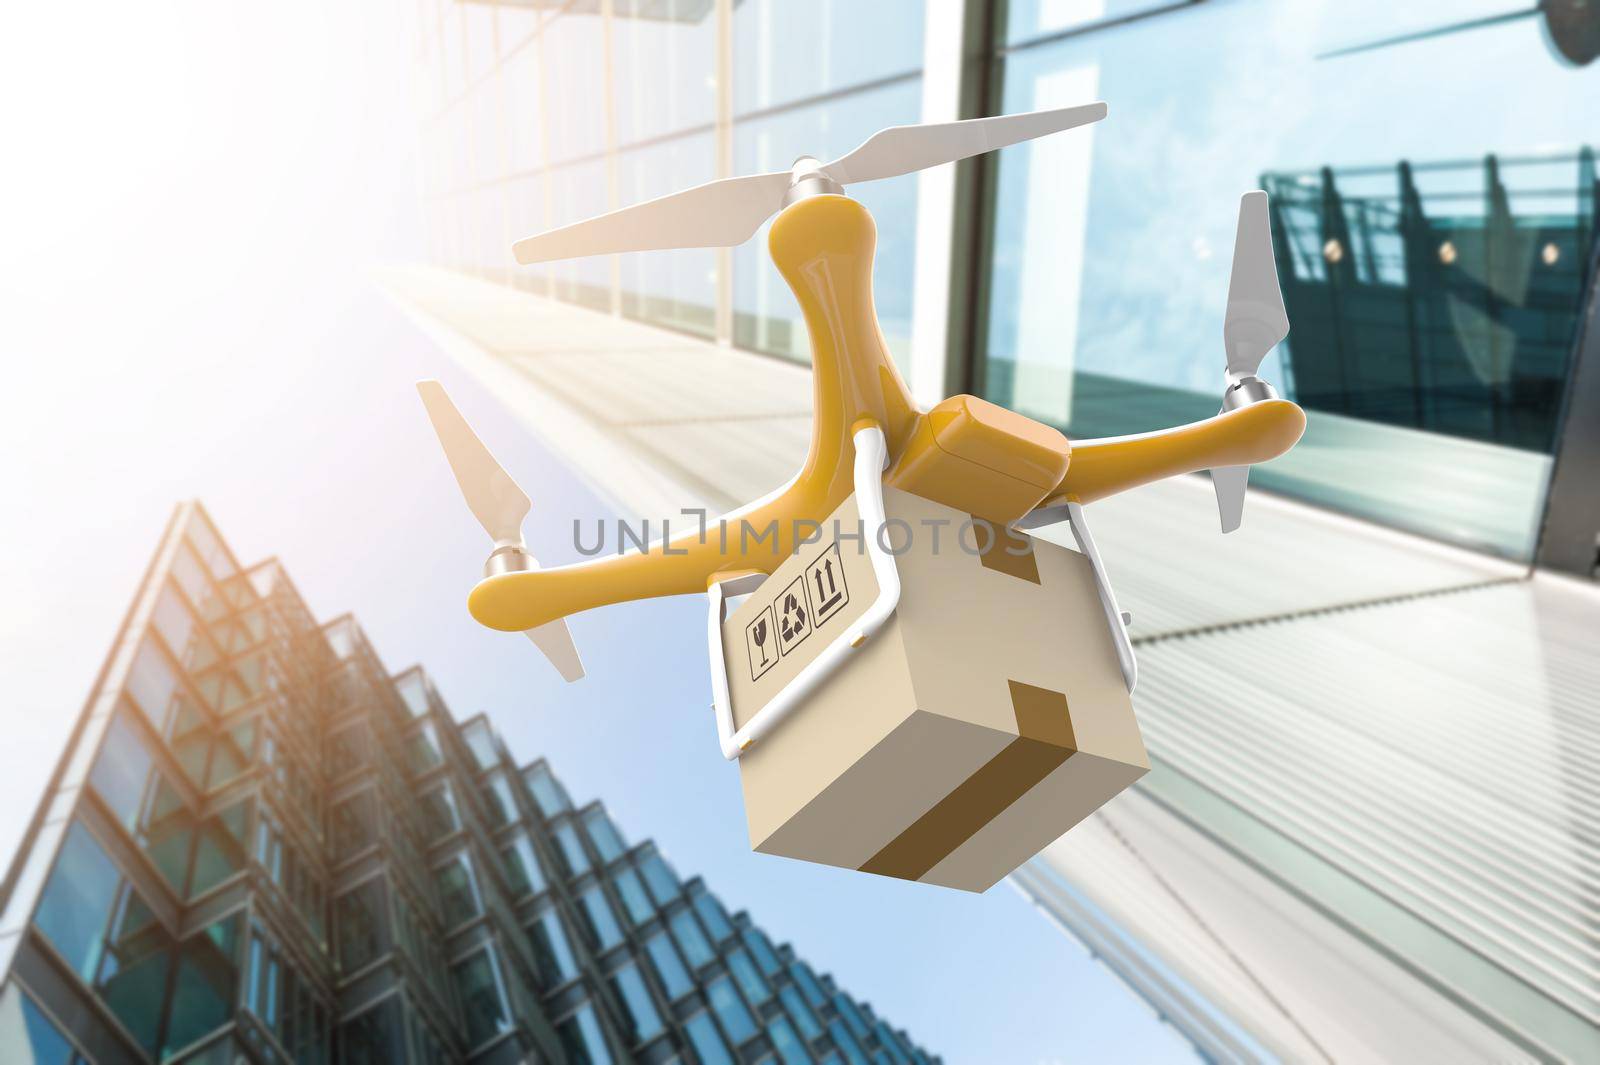 Drone with a delivery box package in a modern city by cla78